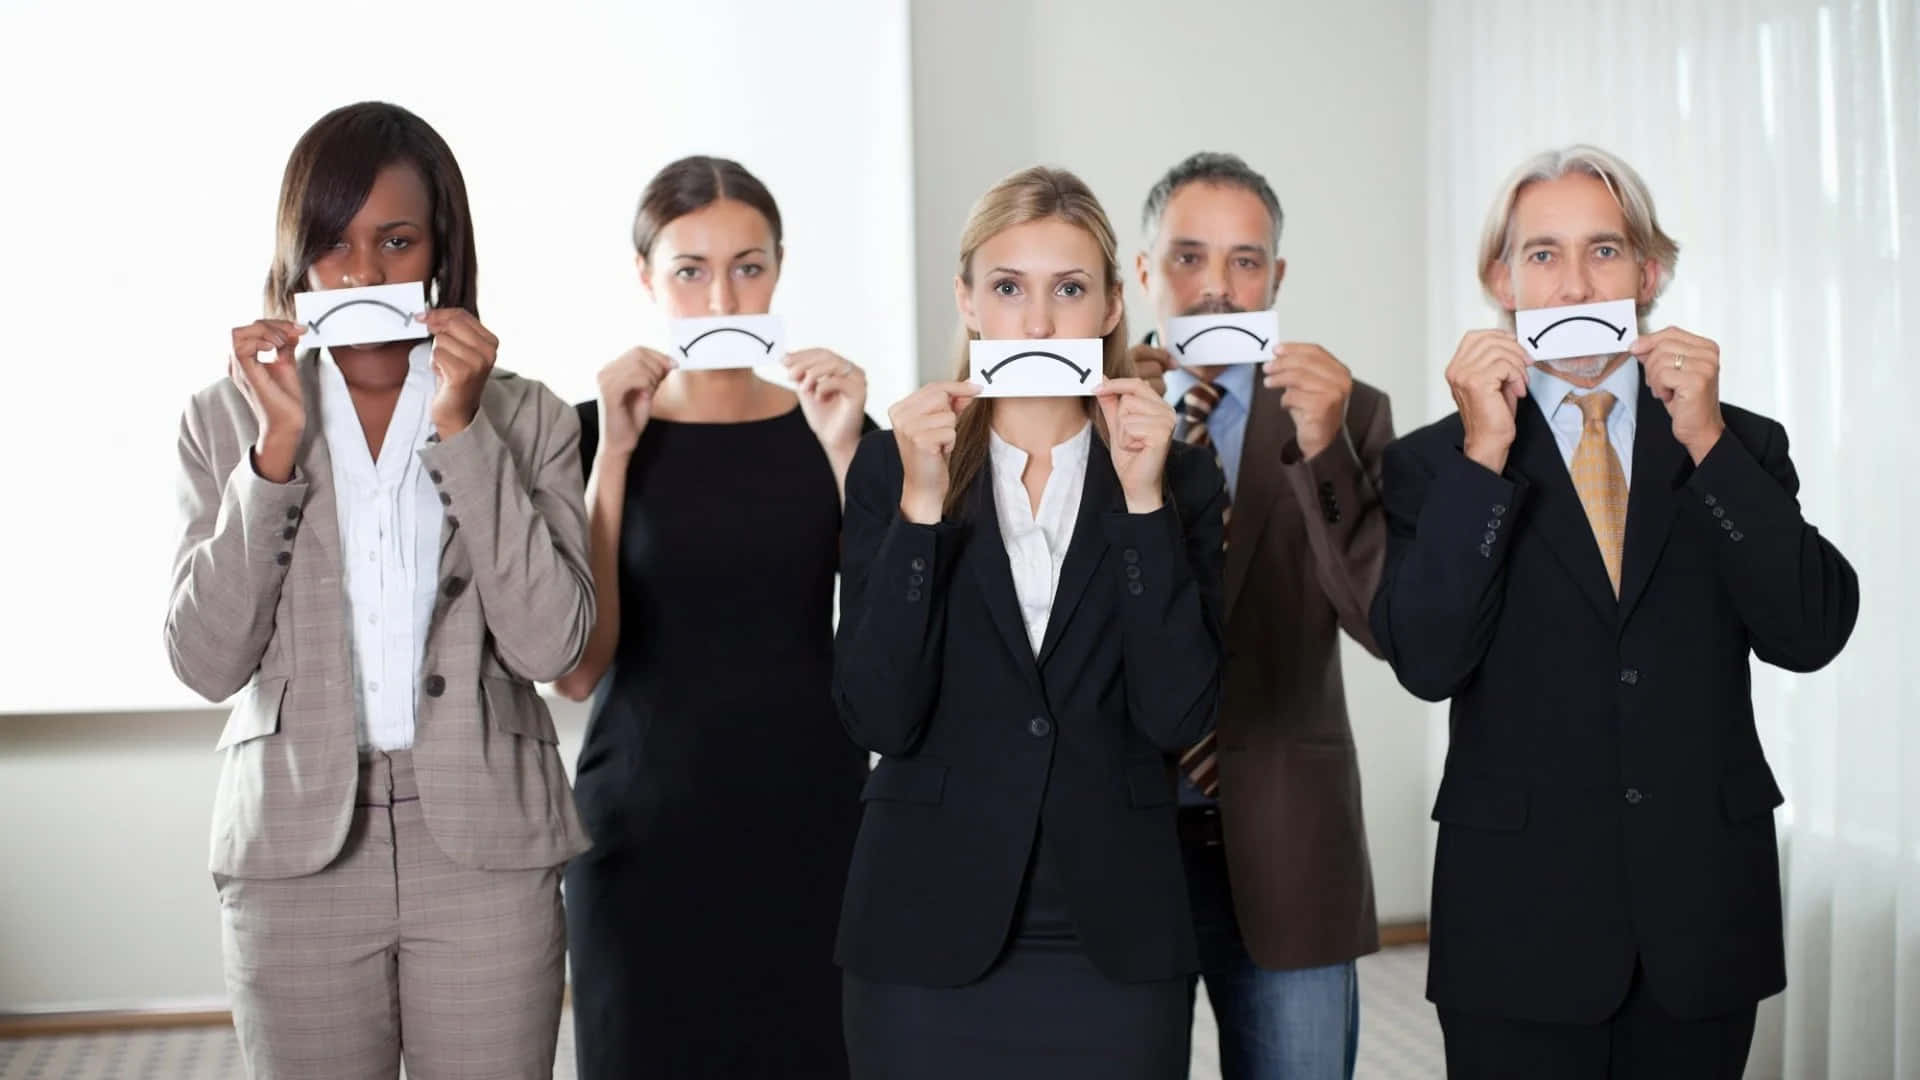 Business People Holding Up Paper With Sad Faces